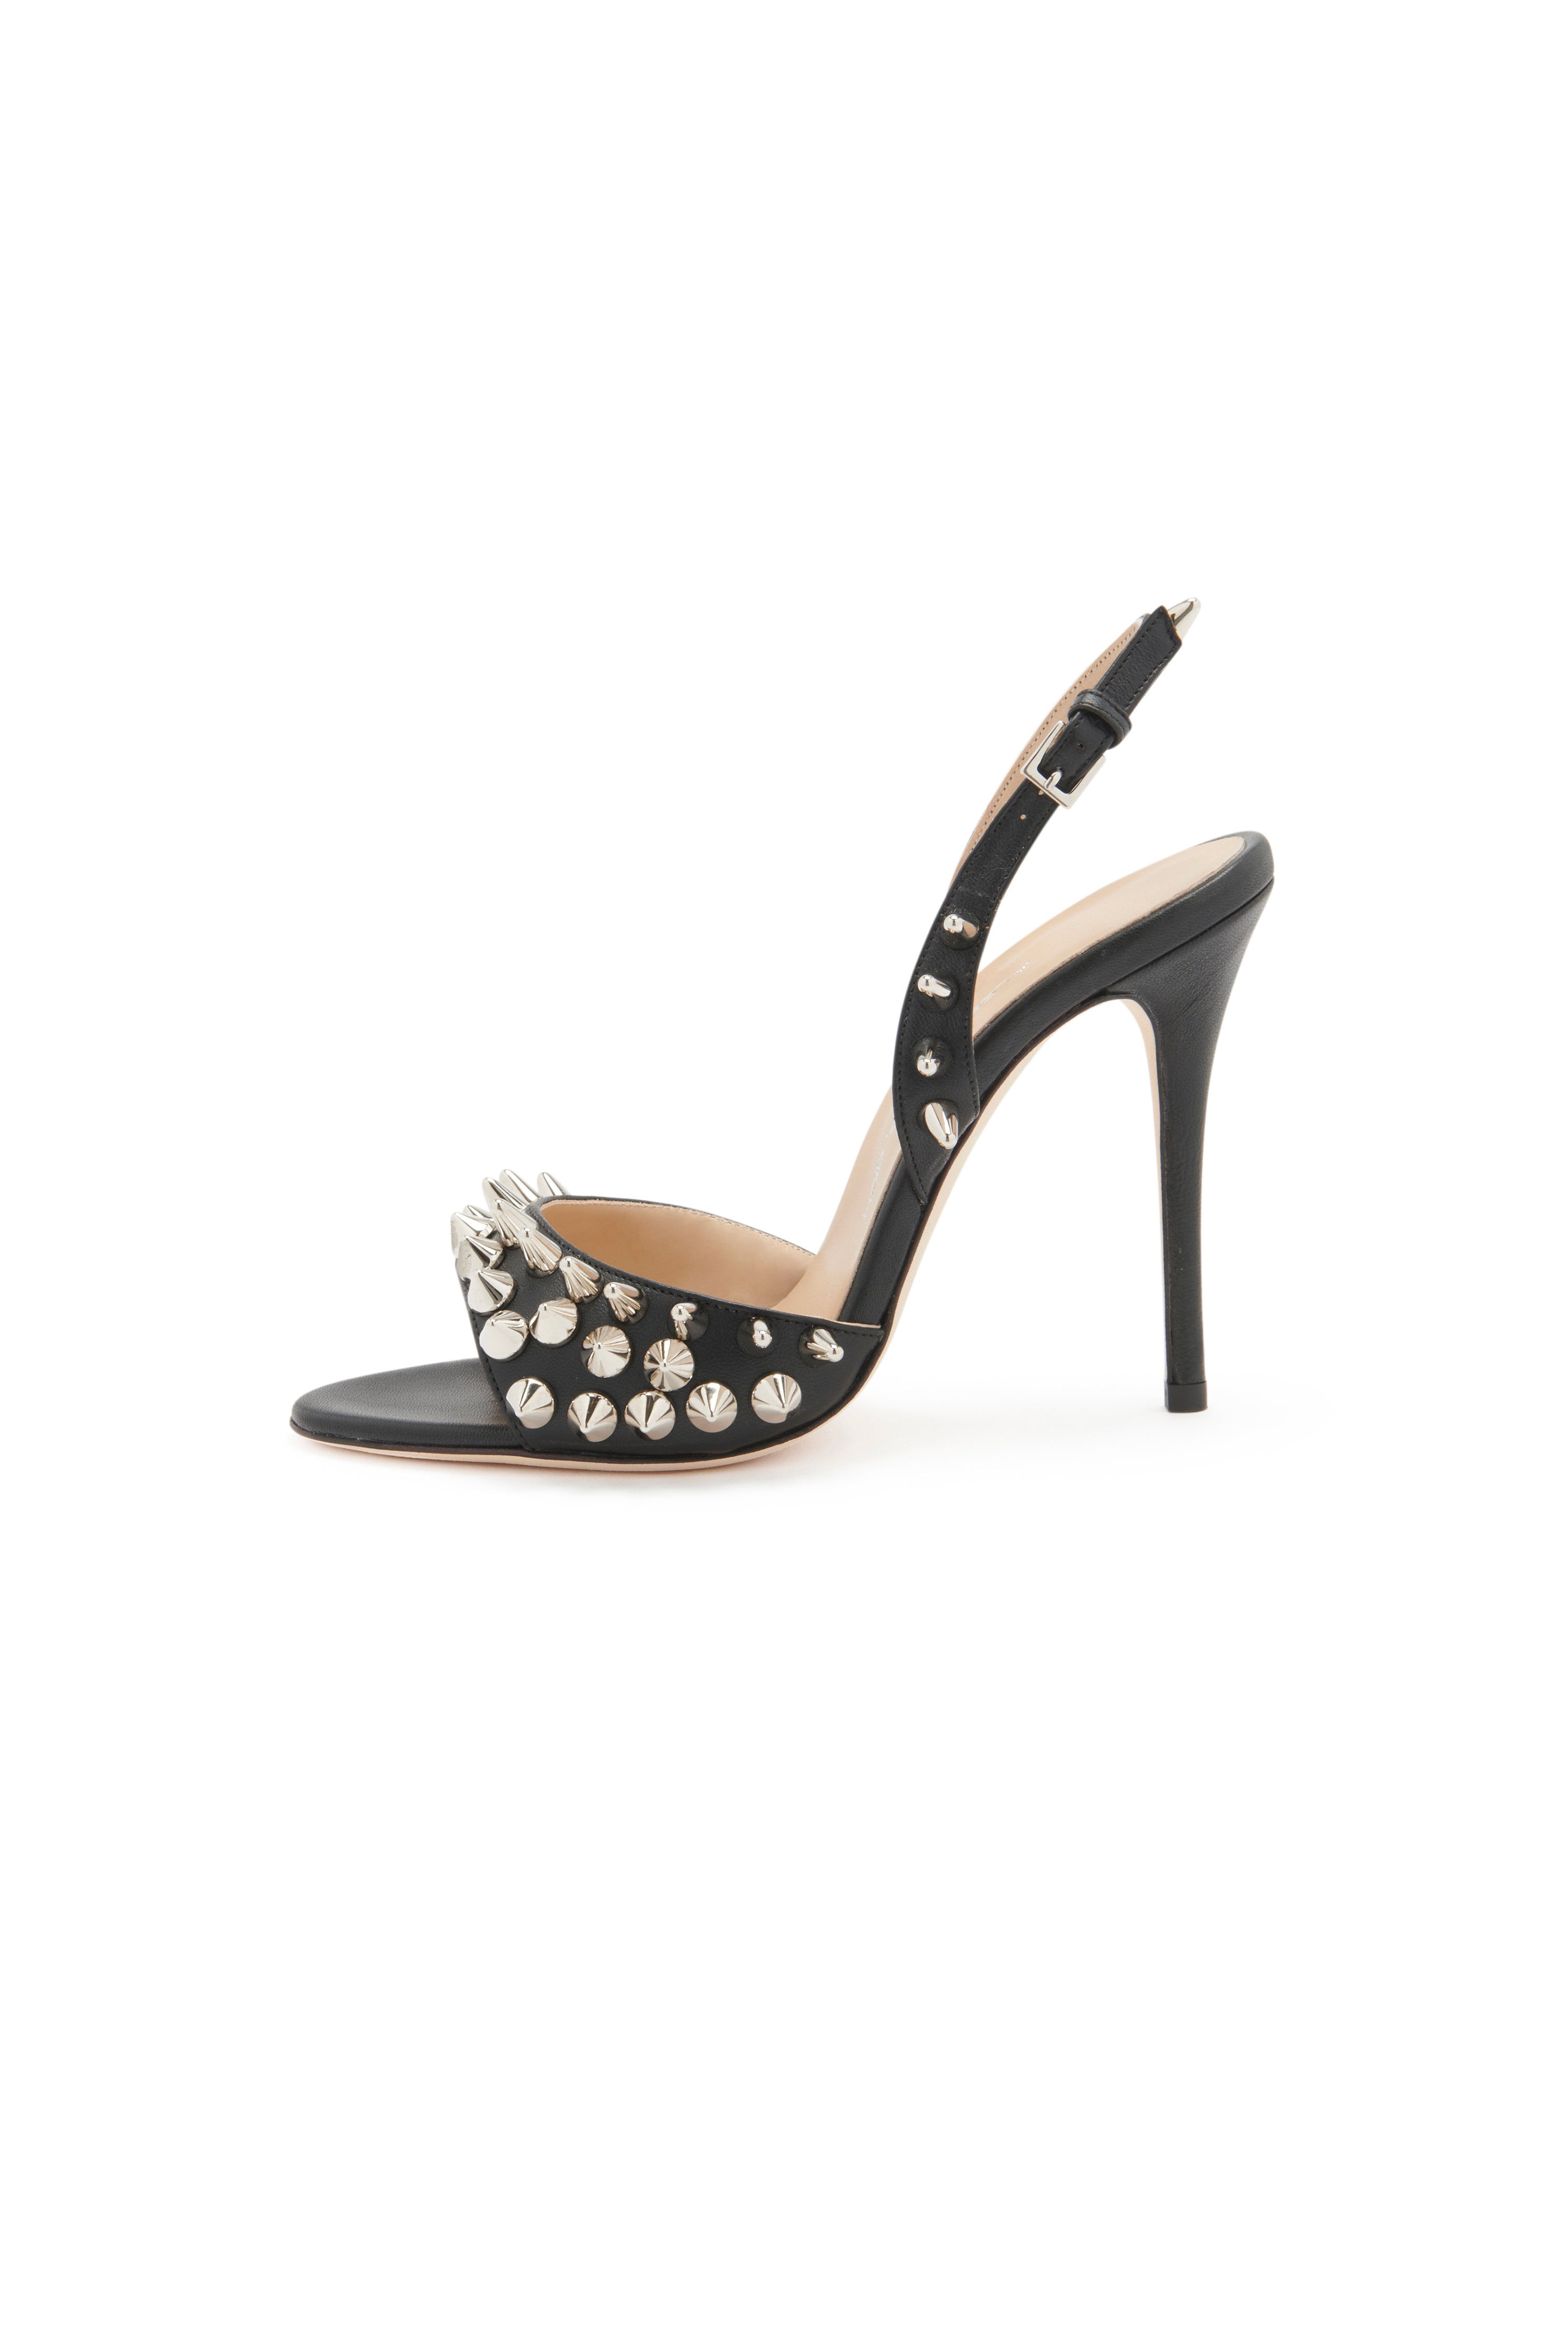 LEATHER SANDALS WITH SPIKES - 10CM